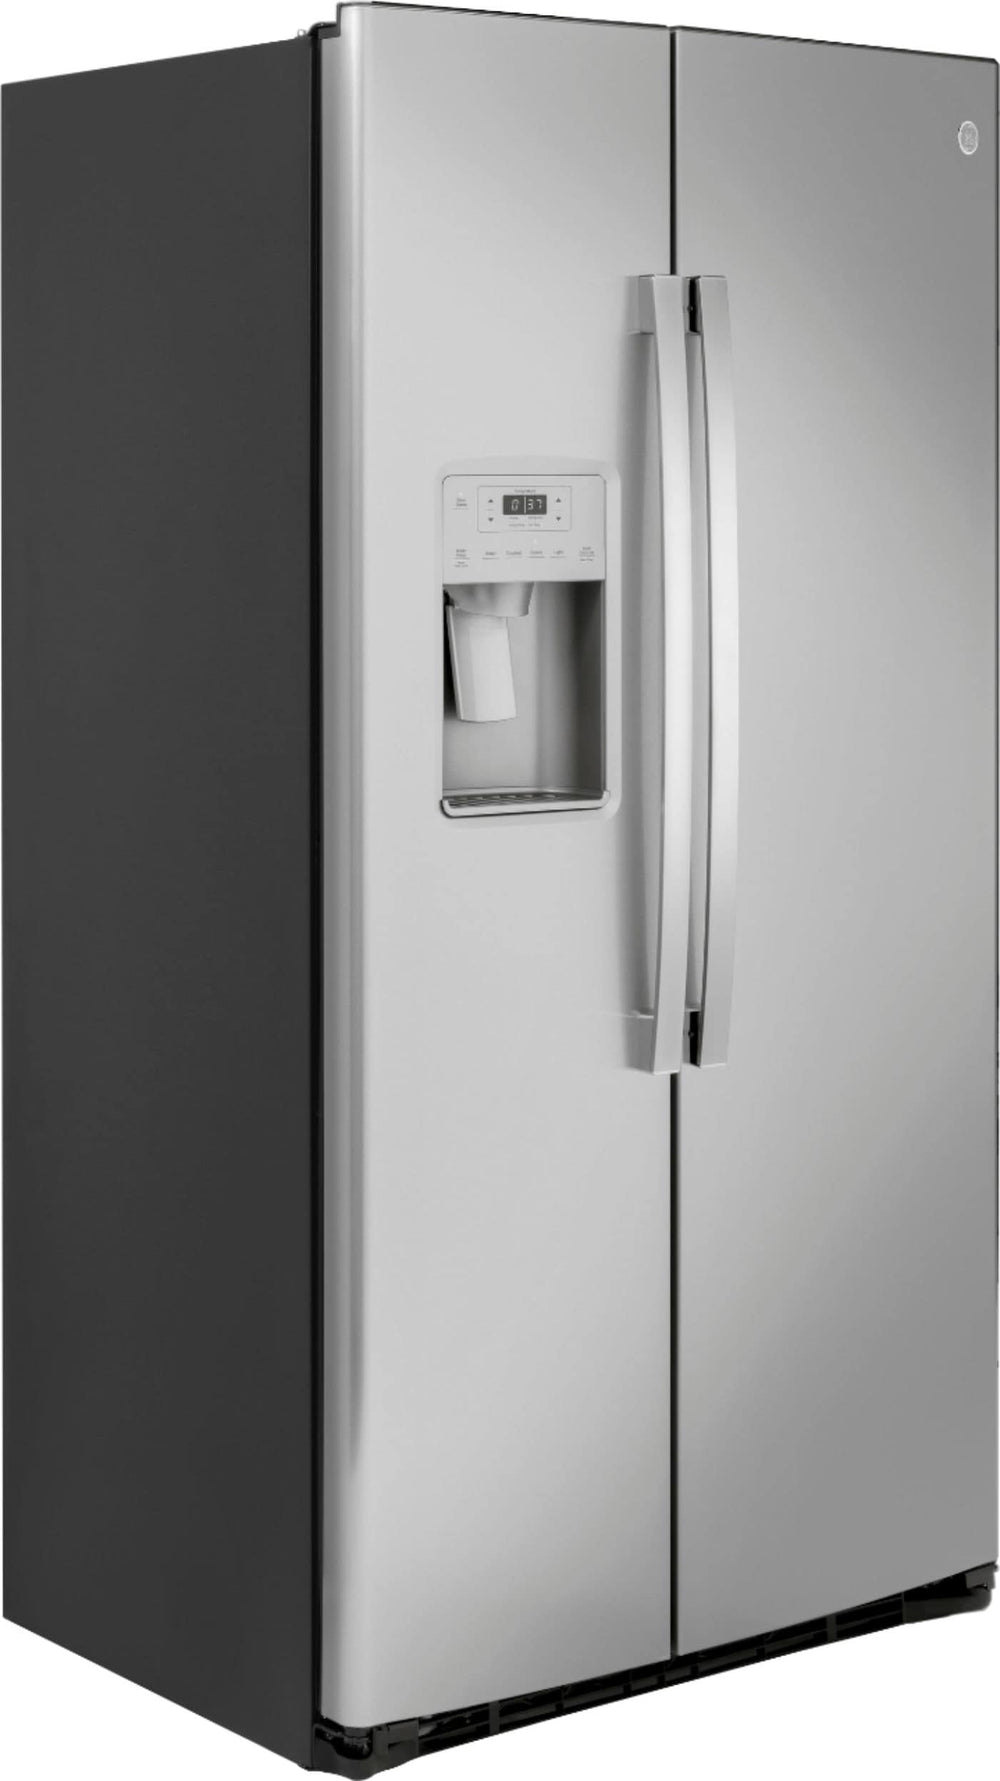 GE - 21.8 Cu. Ft. Side-by-Side Counter-Depth Refrigerator - Stainless steel_1